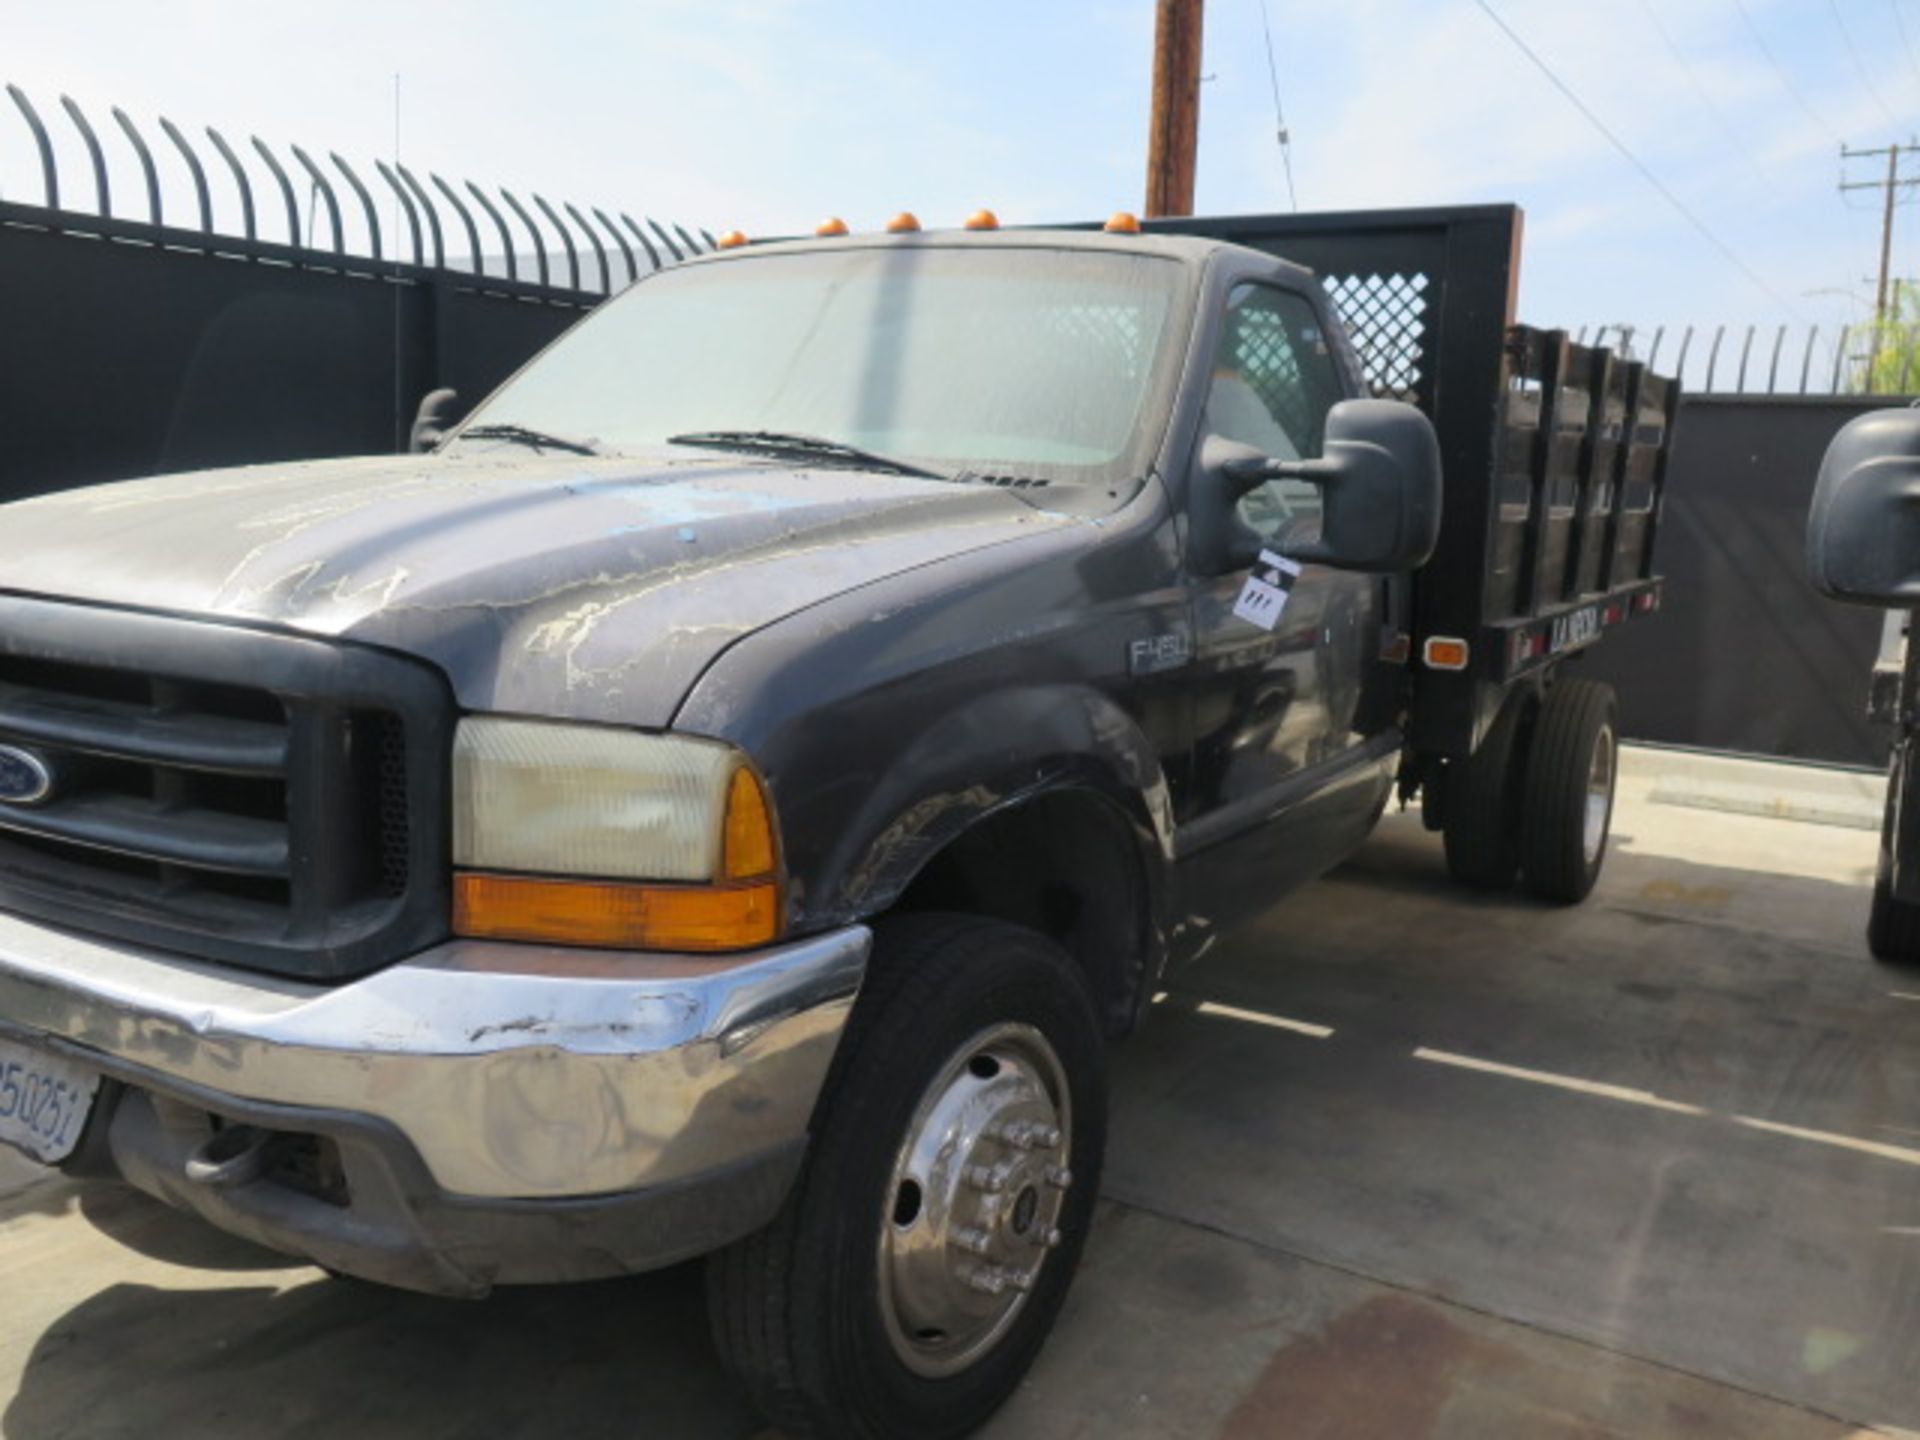 1999 Ford F-450 Super Duty 8’ Bed Truck Lisc# 6B50251,7.3L Diesel,Auto, NOT FOR CA USE, SOLD AS IS